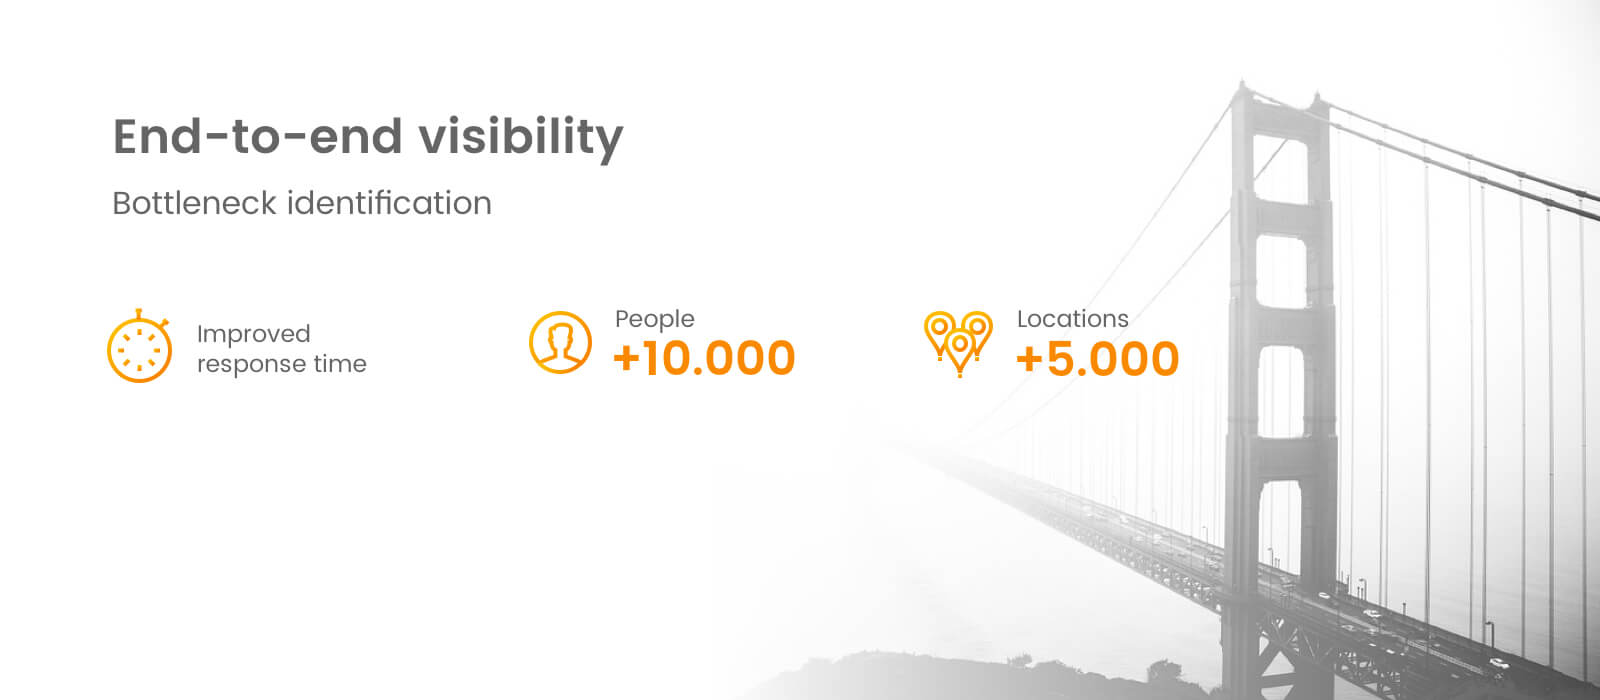 Babel Processes Mapfre.  Scheme that defines the benefits of having end-to-end visibility. Helps to identify bottlenecks, improves response time. Take to +10,000 and +5000 locations with a bridge in the background